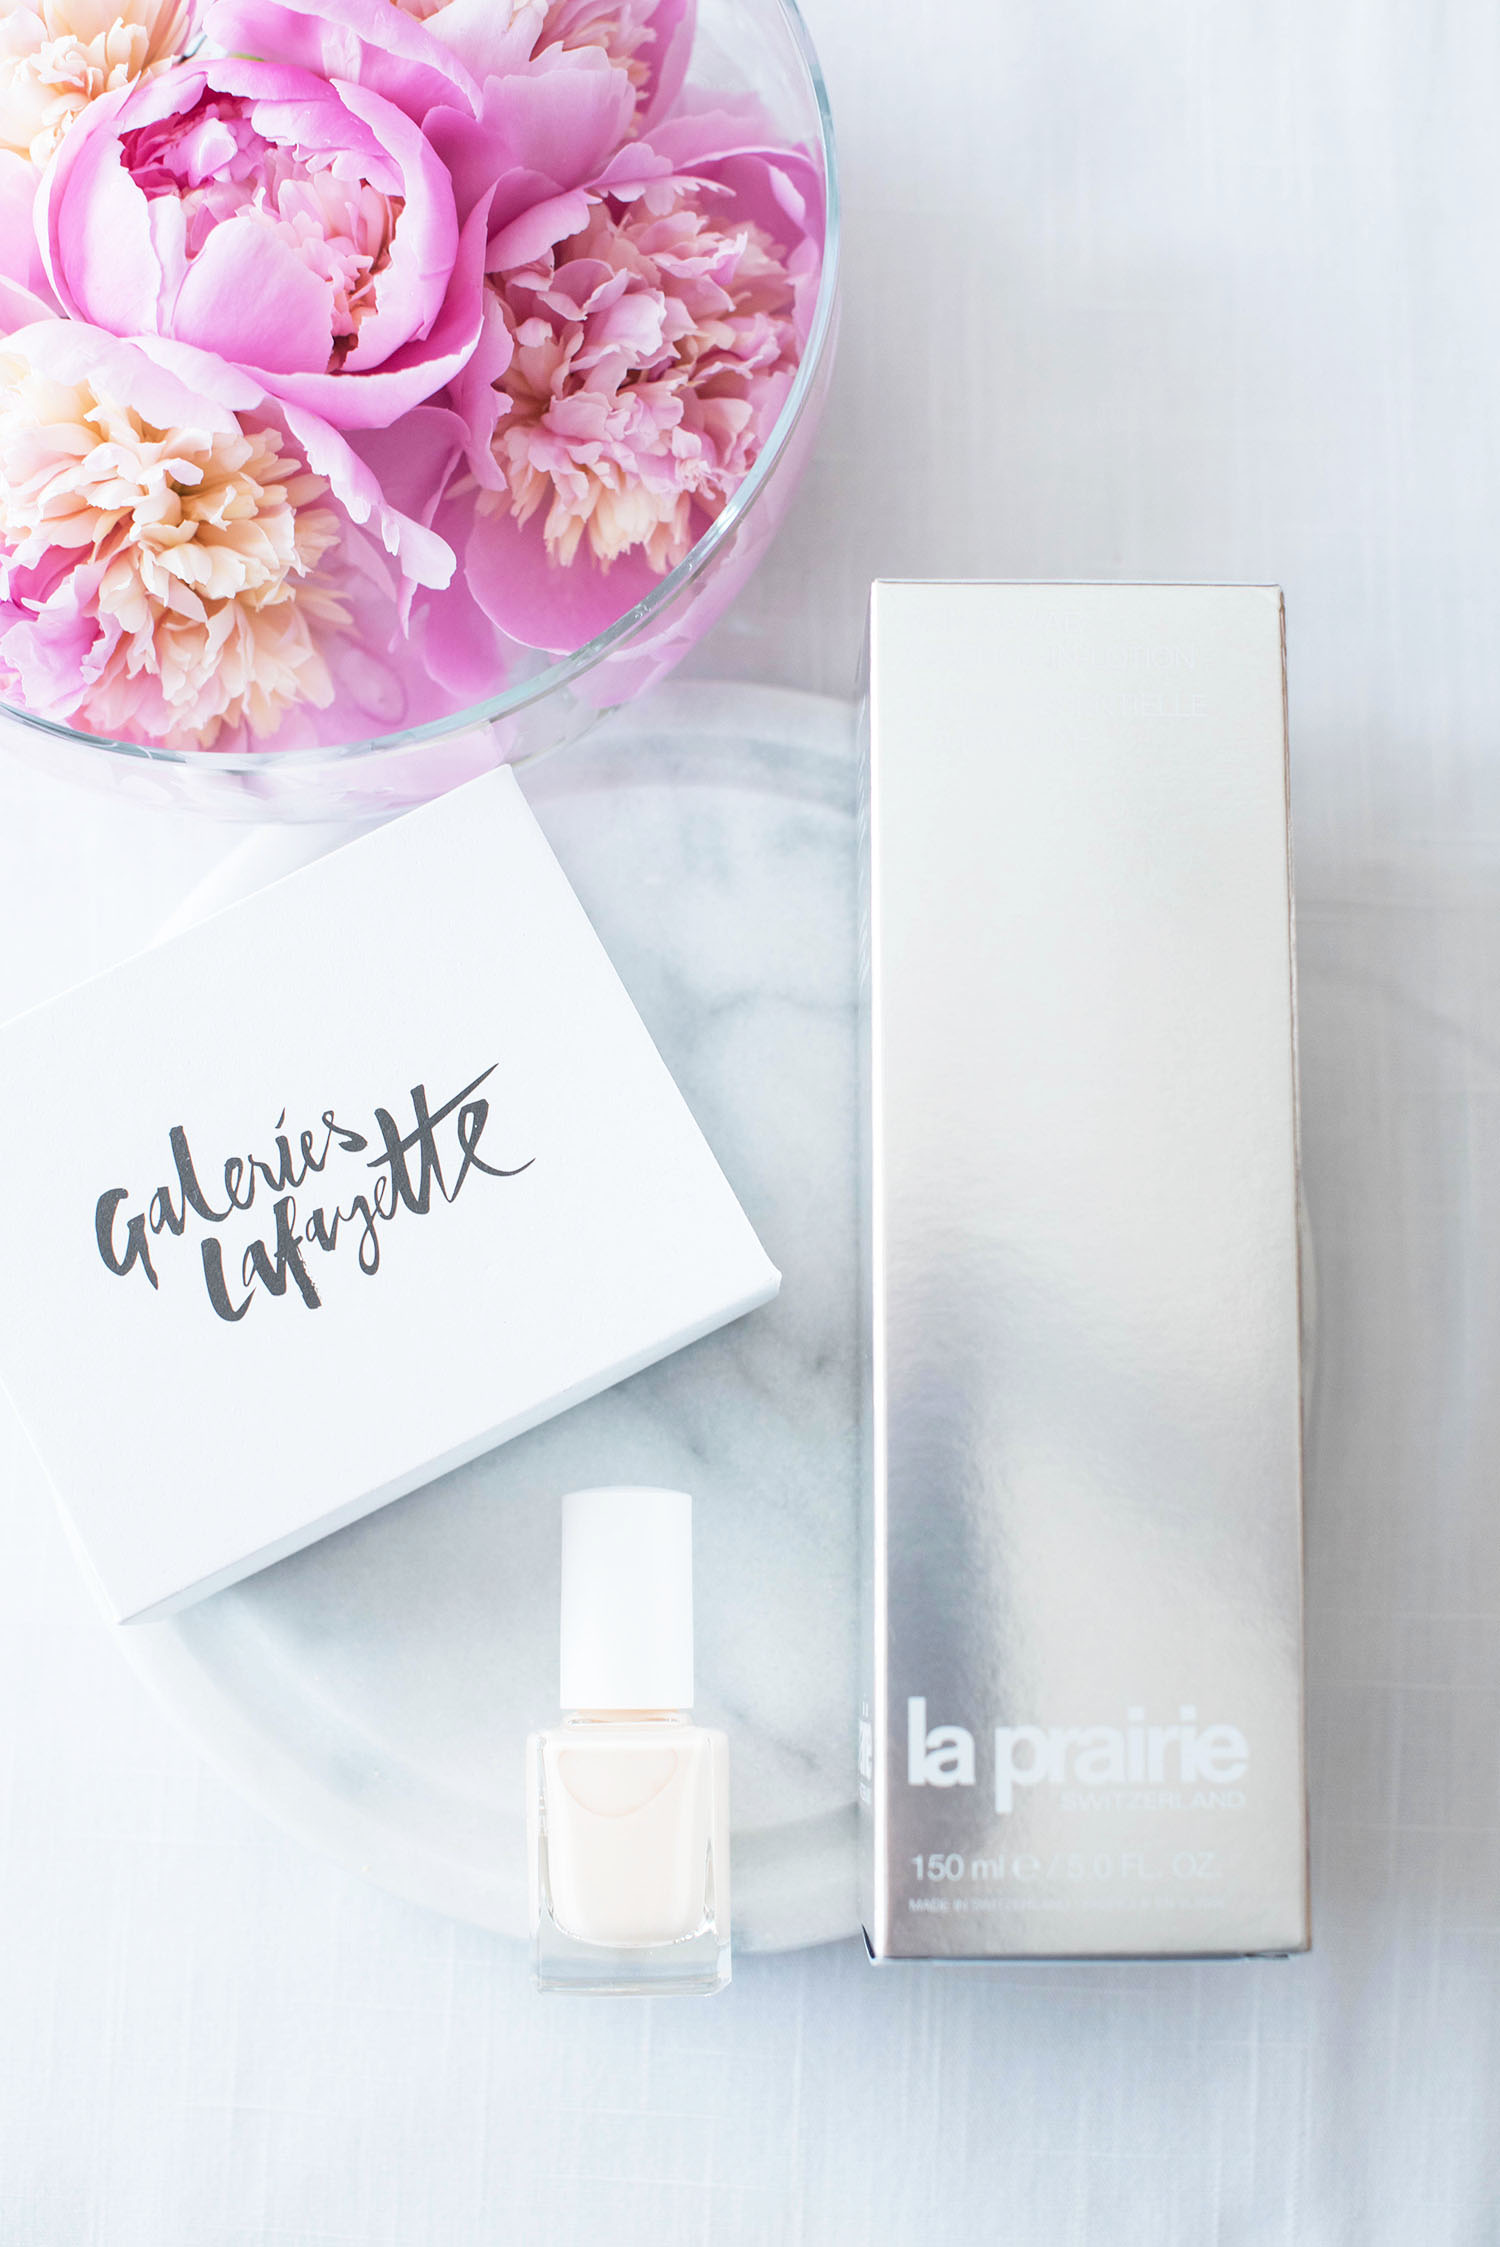 Silver La Prairie box next to a bowl of peonies, photographed by beauty blogger Cee Fardoe of Coco & Vera